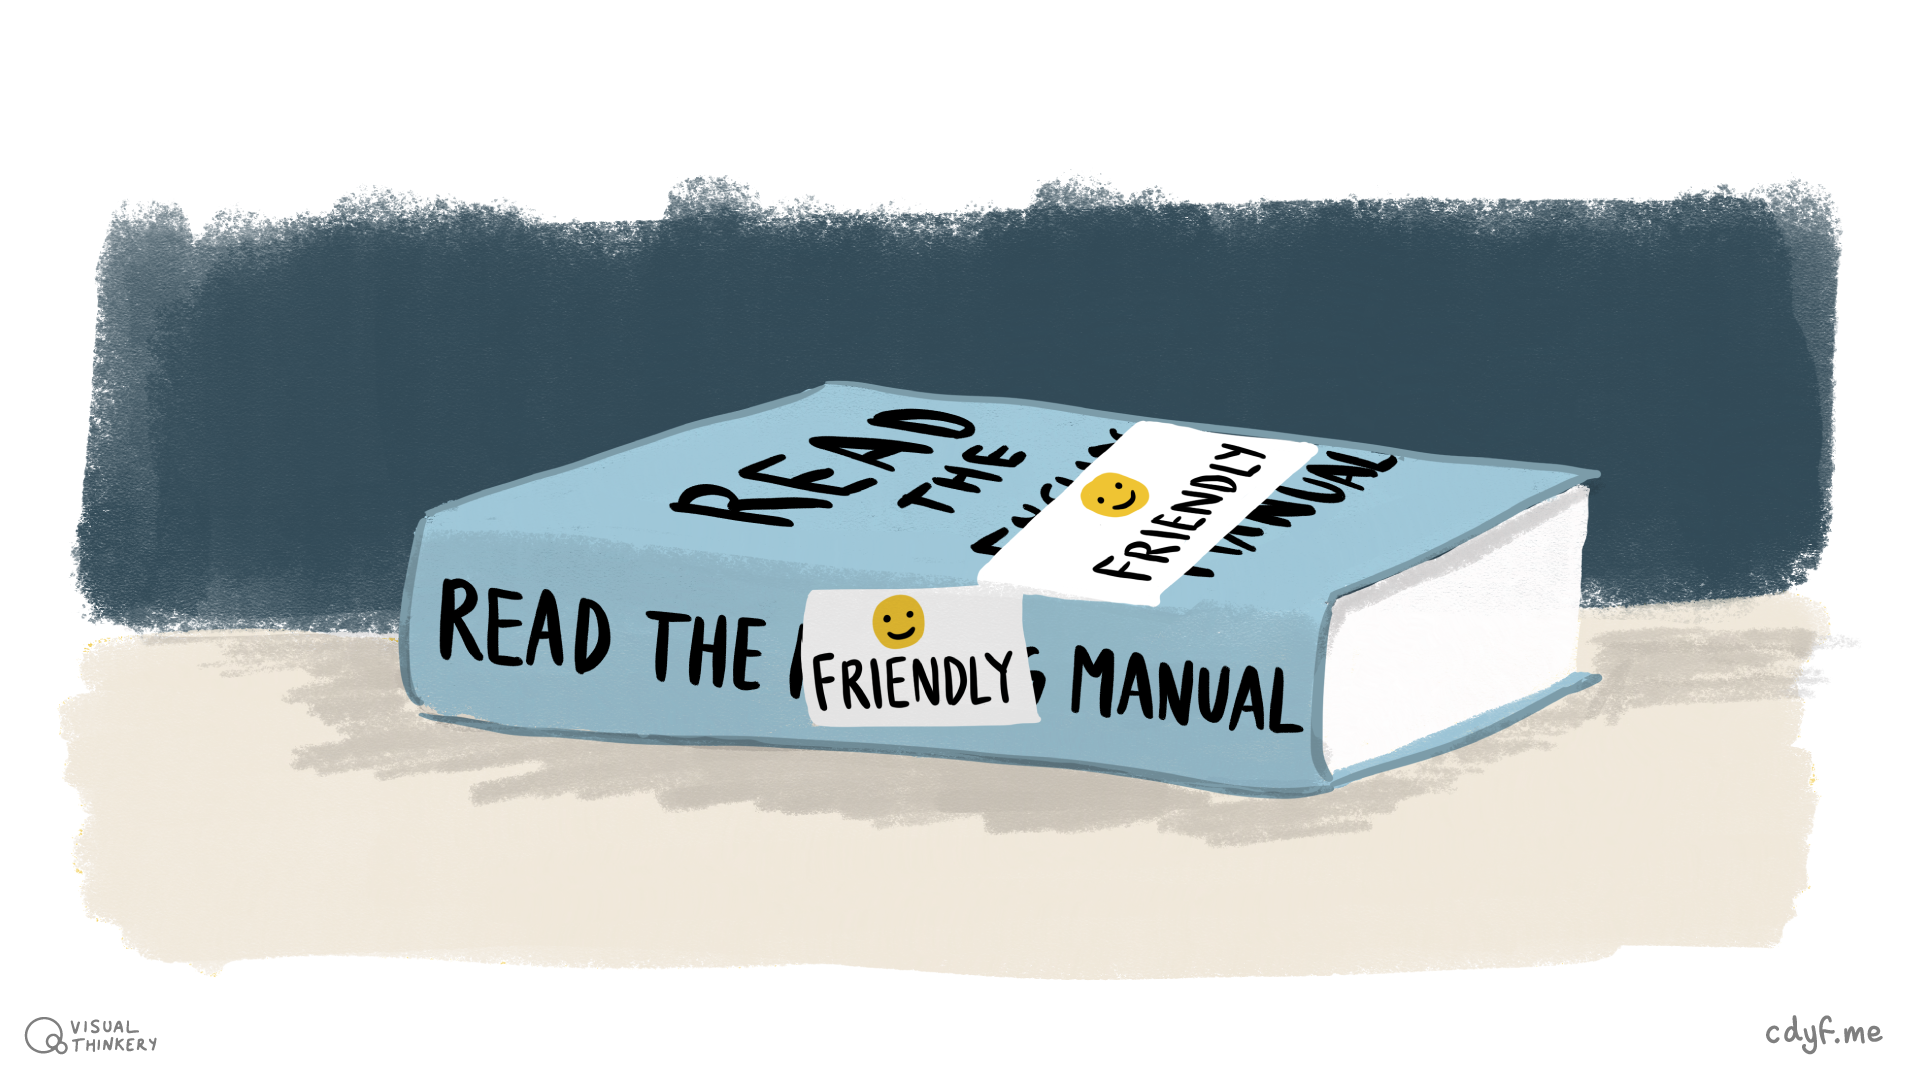 Read The Friendly Manual (RTFM), some of it you will love, some of it you won’t. Either way reading will help you develop valuable skills and knowledge. Read The Friendly Manual by Visual Thinkery is licenced under CC-BY-ND